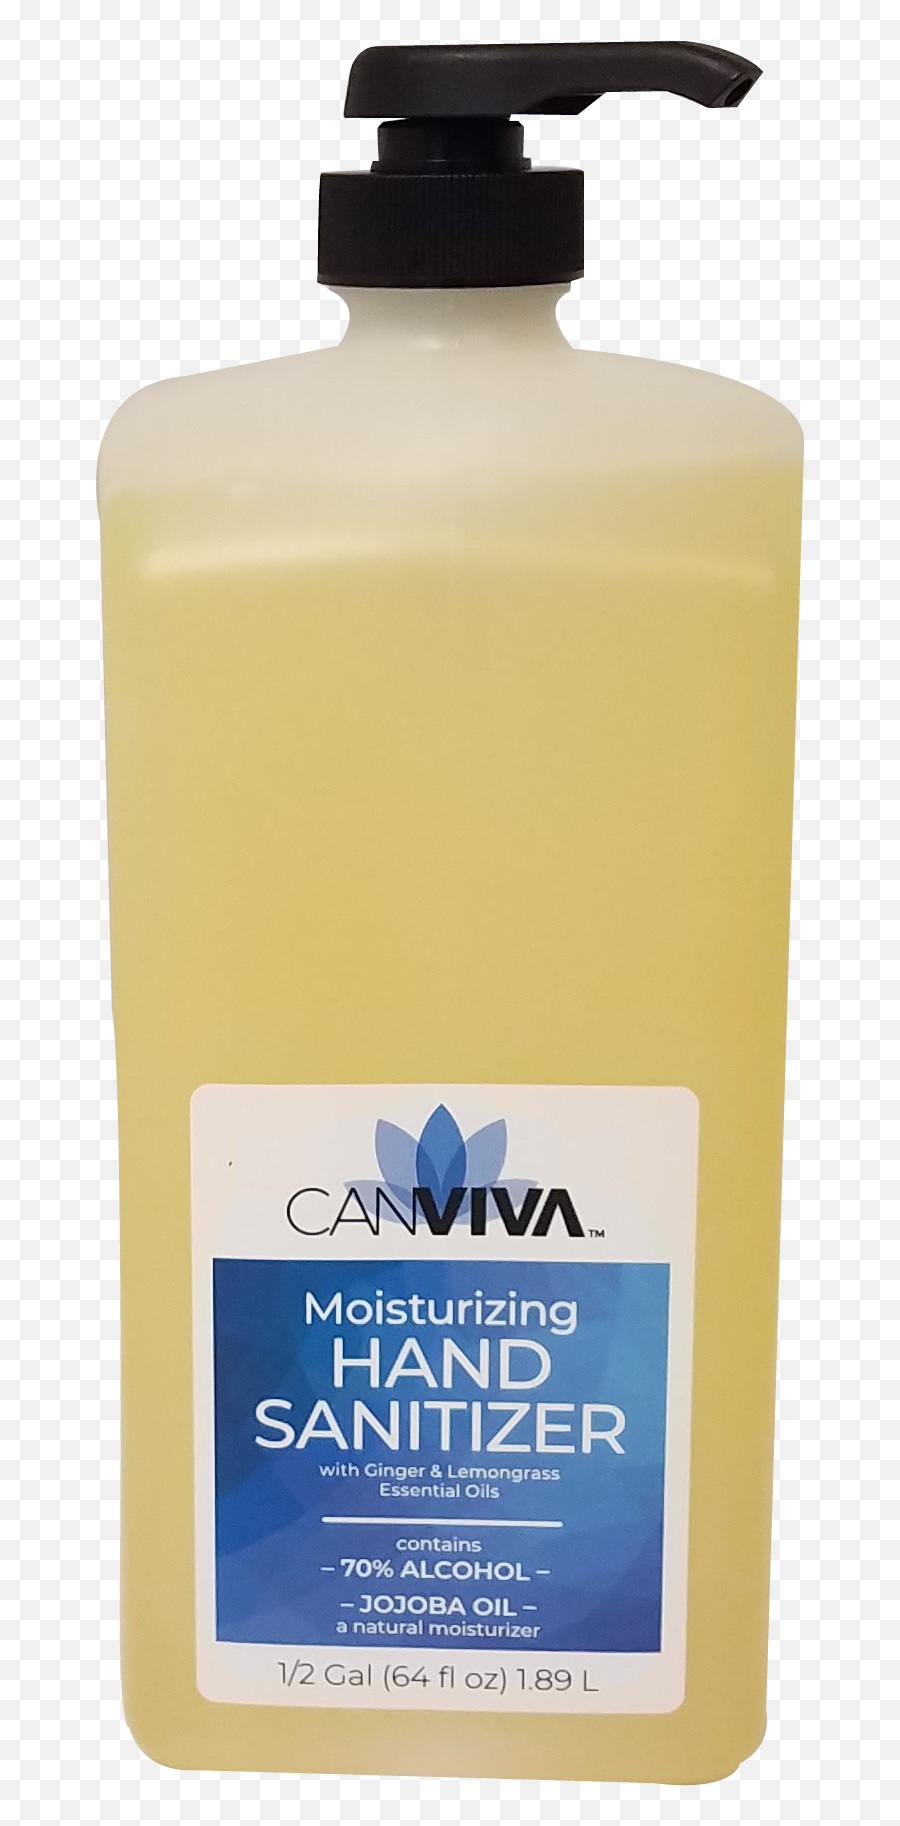 Canviva Moisturizing Antimicrobial Hand Gel Is A Dairy2u Emoji,Hand Sanitizer Png